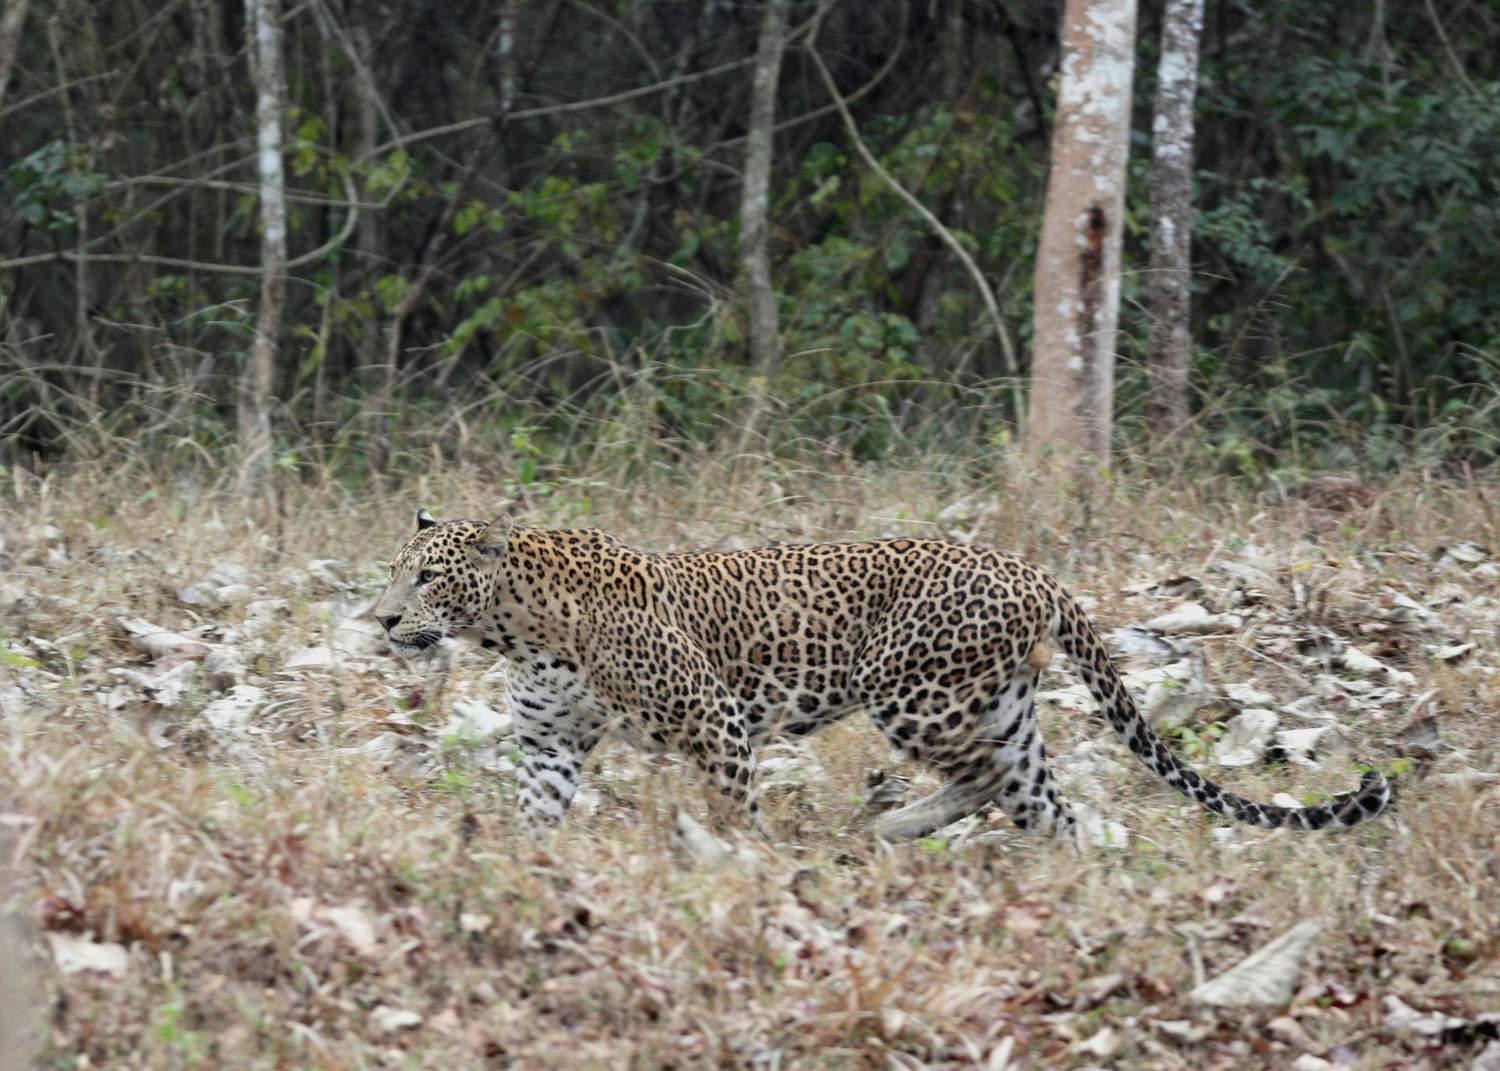 a leopard walking through a forest filled with trees